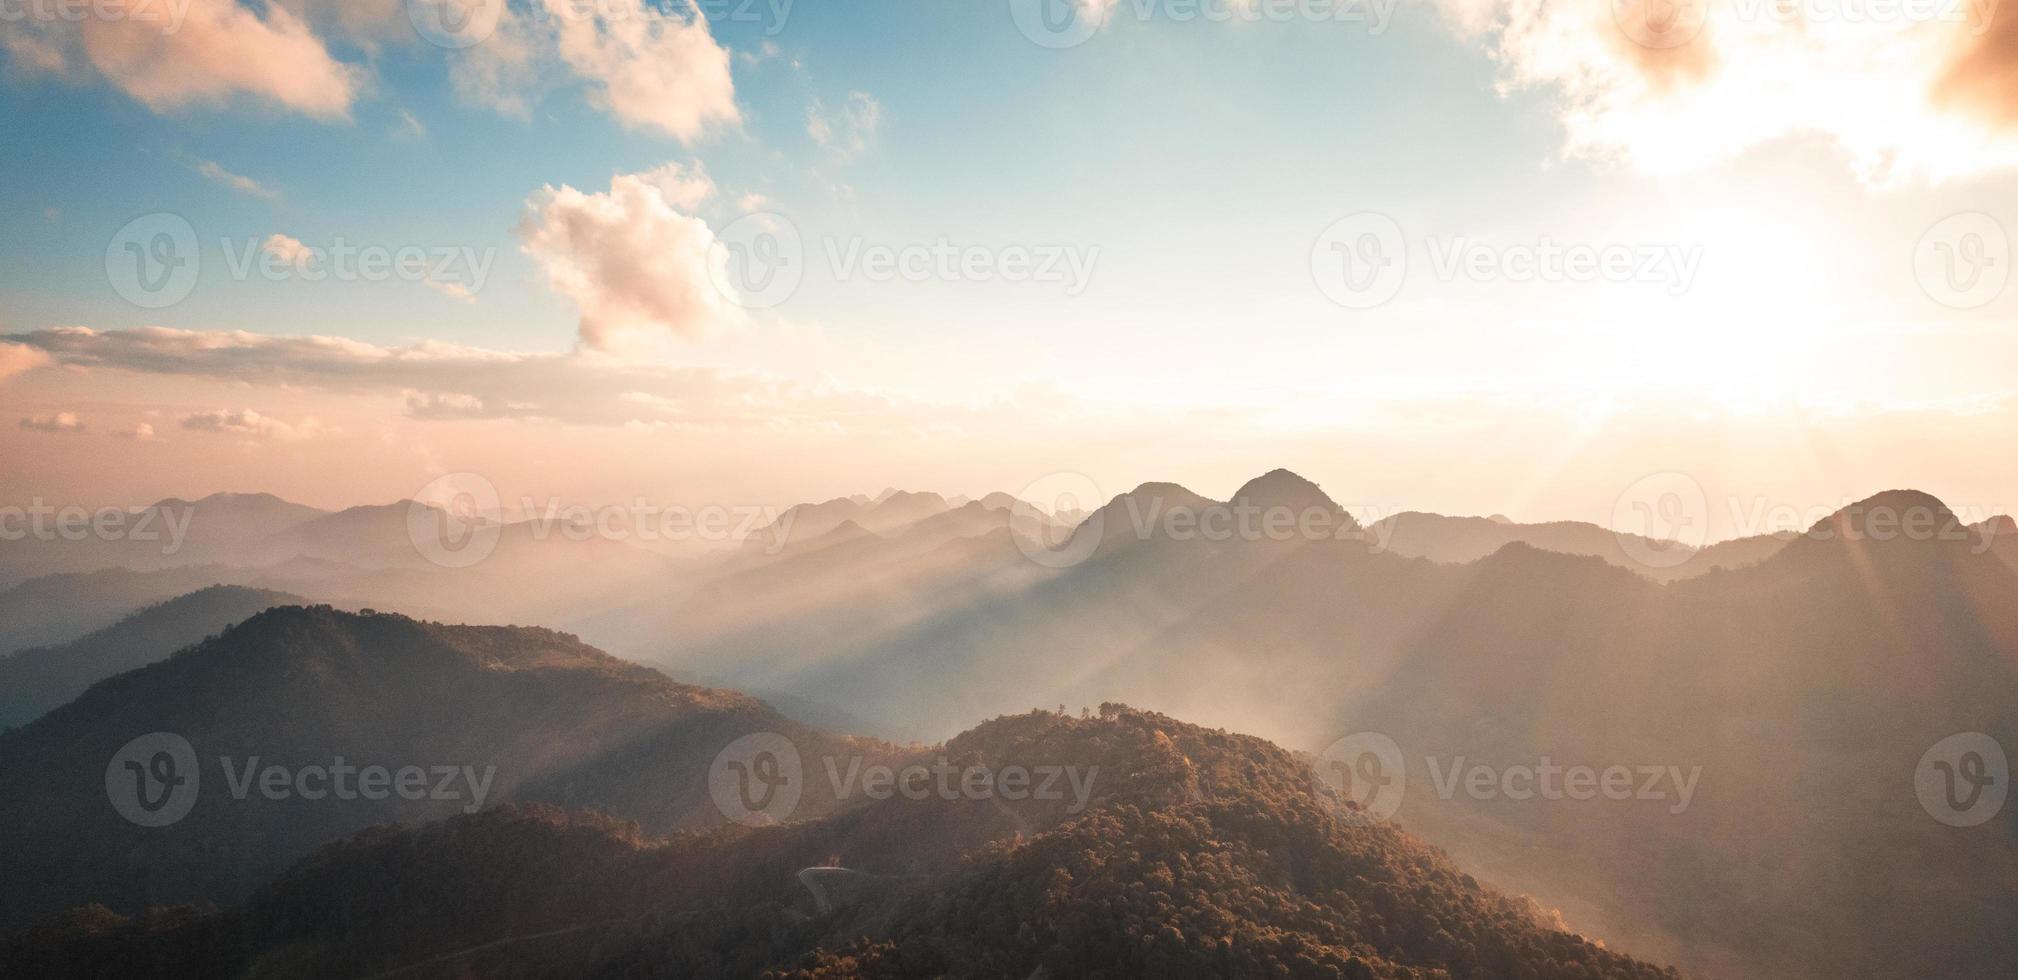 landscape mountain scenery in the evening photo